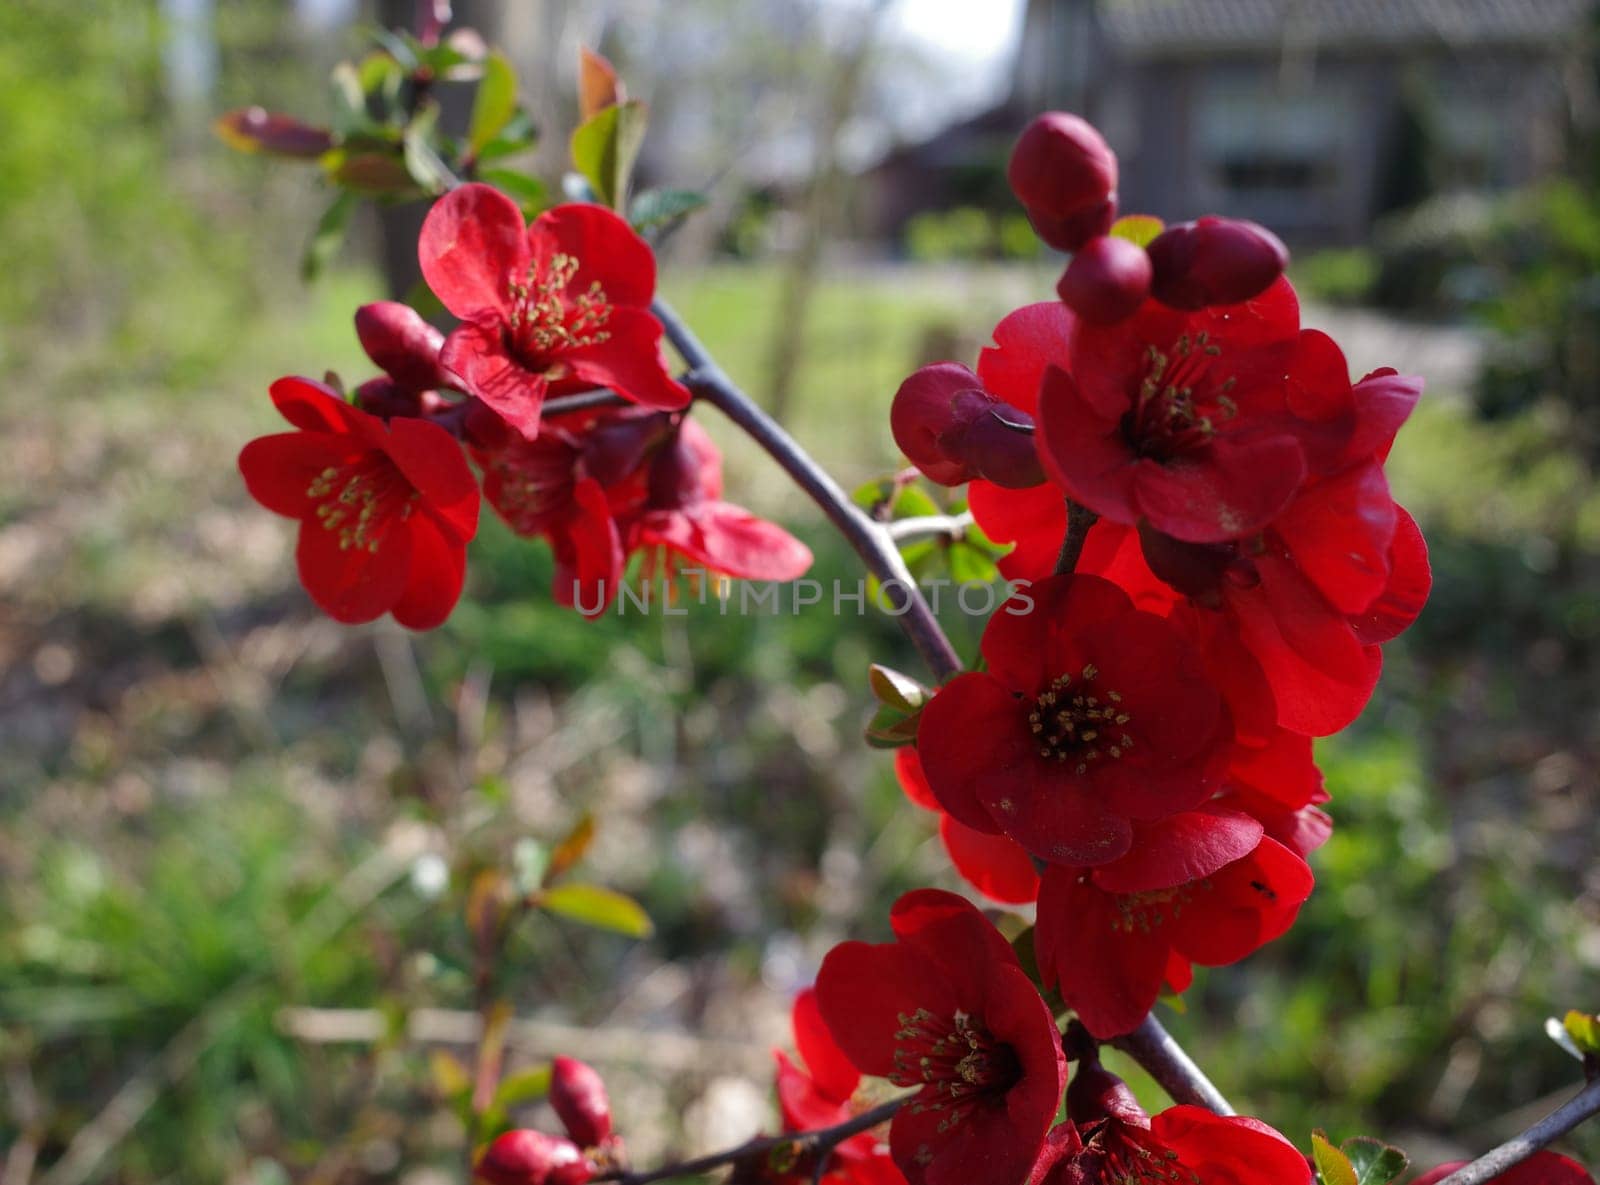 Bright red Japanese quince flowers against a blurred background